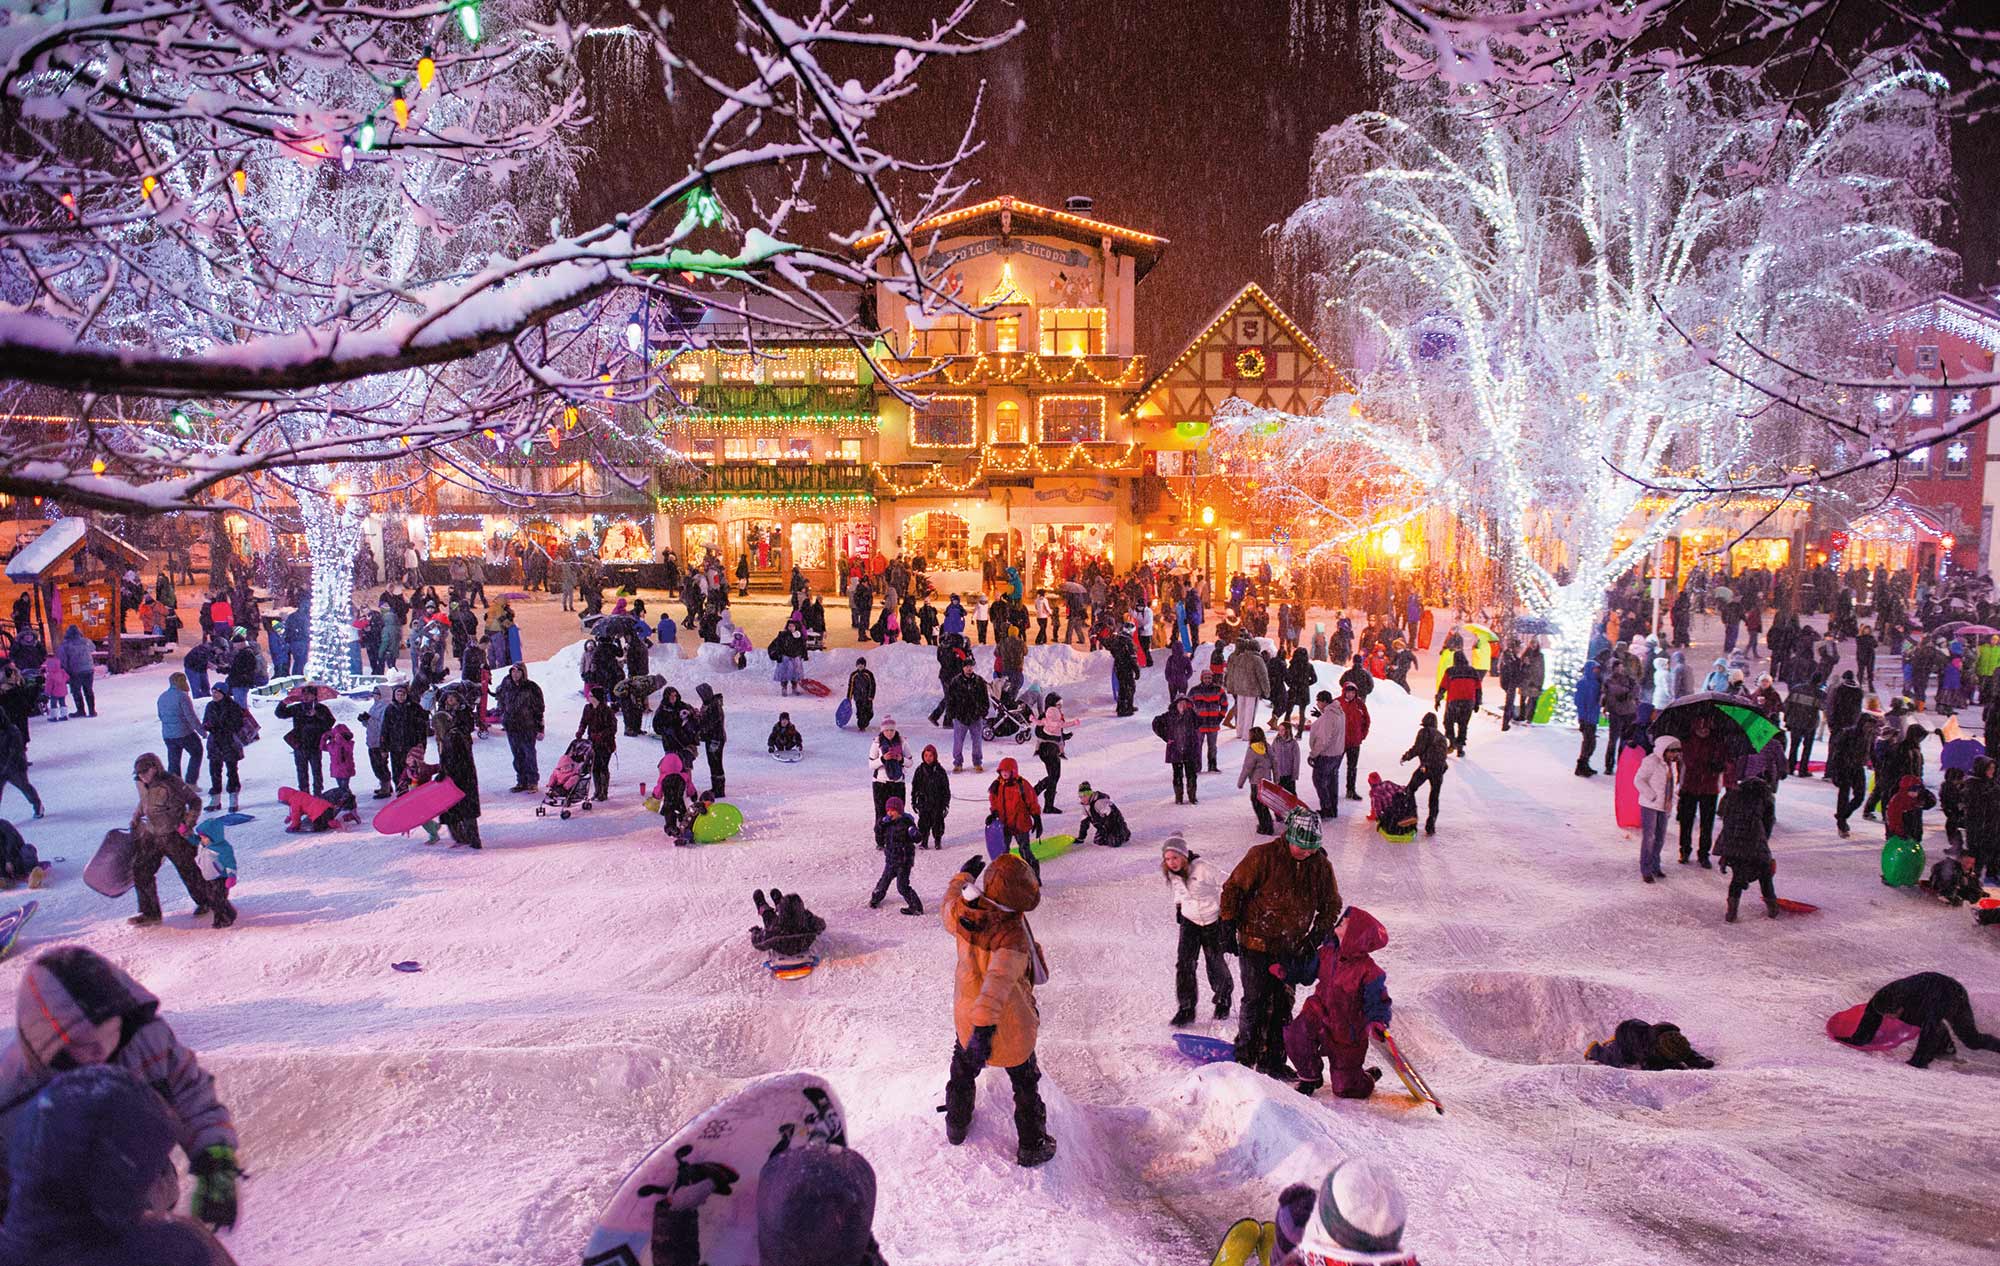 The small-town charm of a Leavenworth Christmas